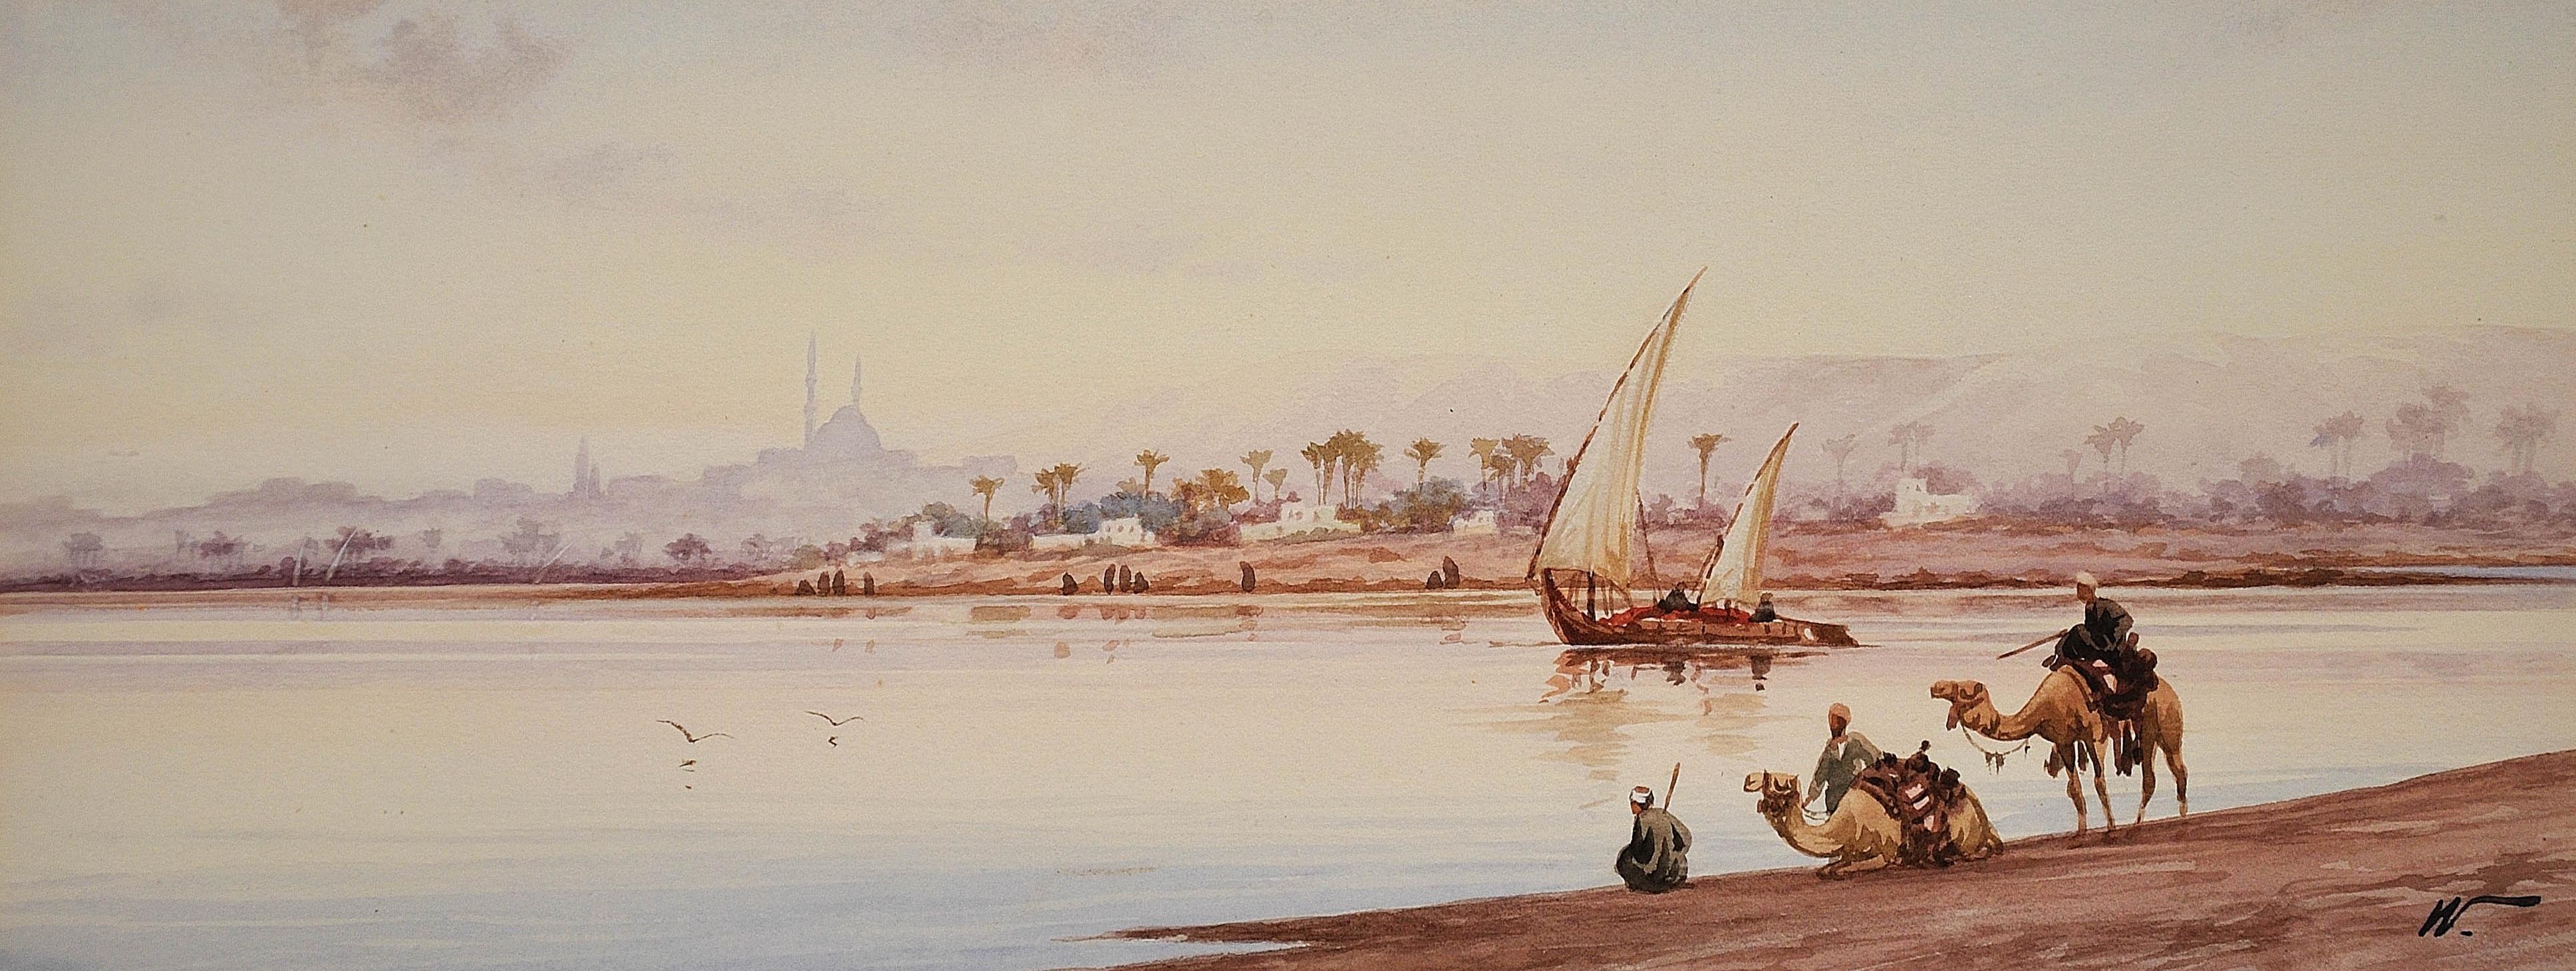 River Nile Feluccas and Camels. Egypt. American Orientalist Watercolor. Mosque. - Art by Edwin Lord Weeks